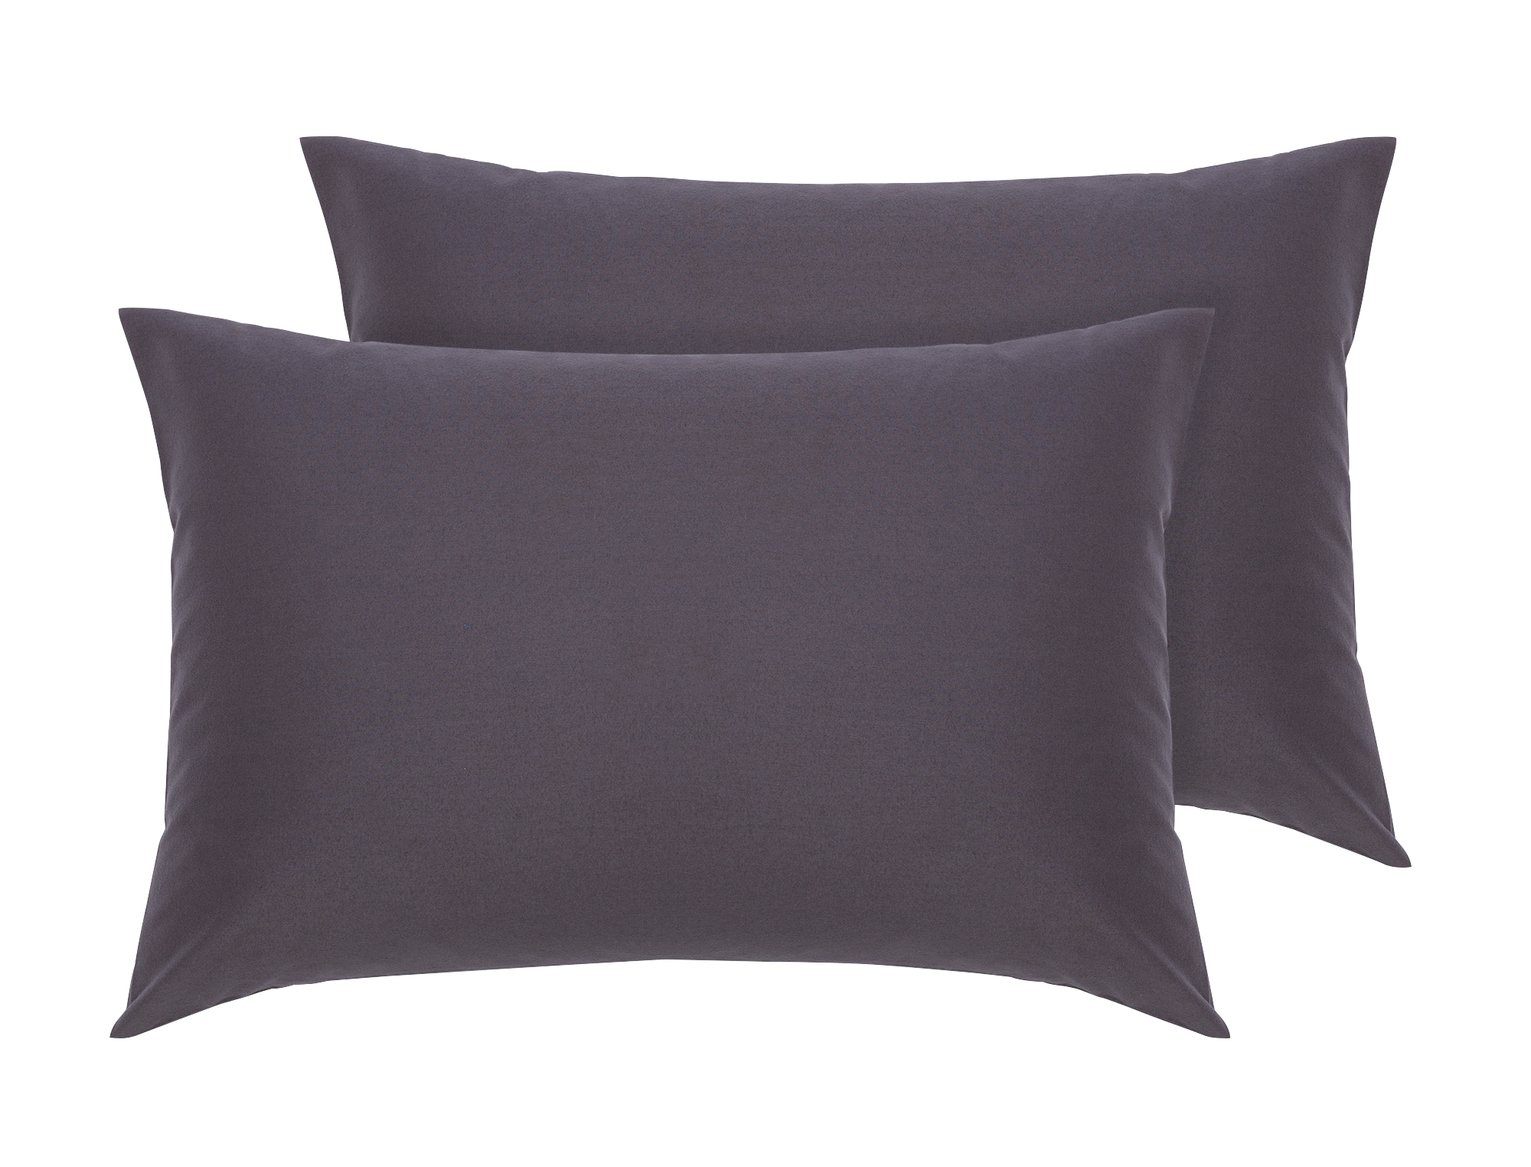 Argos Home Brushed Cotton Standard Pillowcase Pair Charcoal